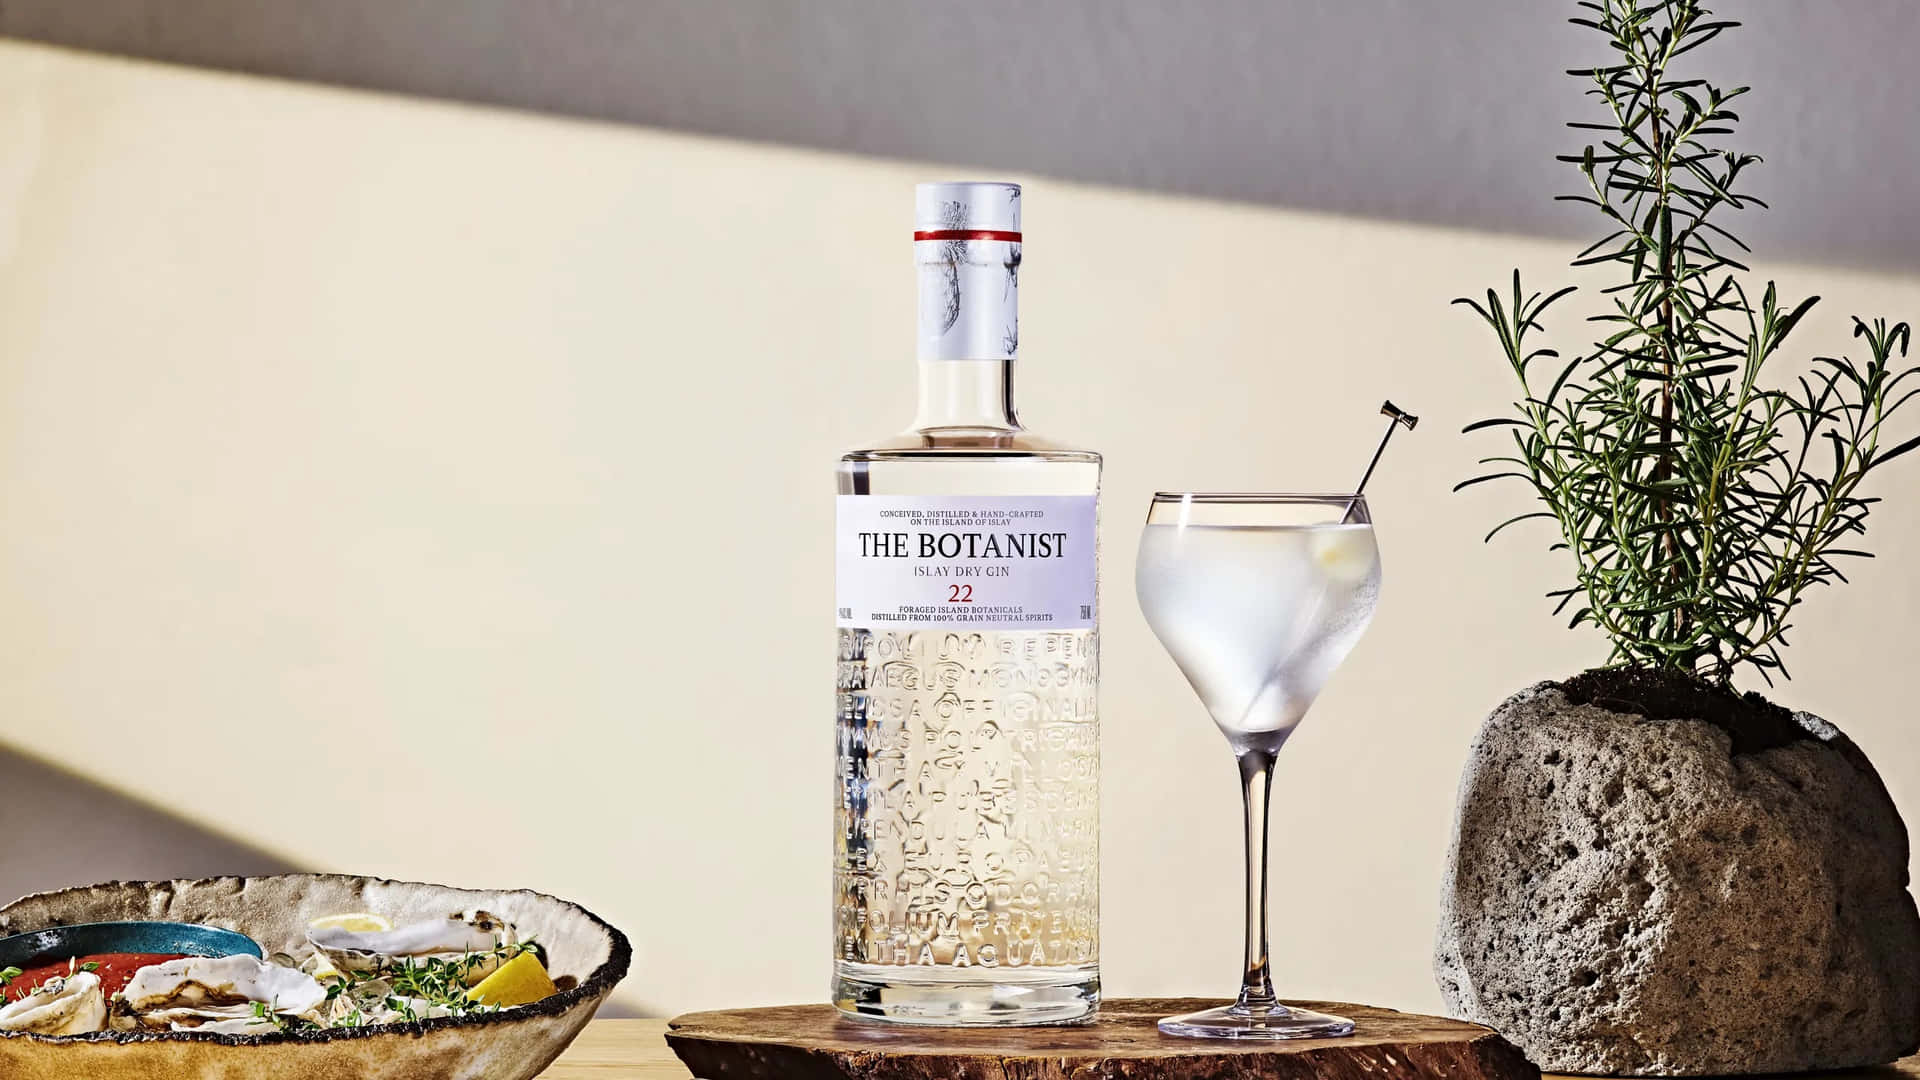 The Botanist Islay Dry Gin And Rosemary Rock Vase Wallpaper